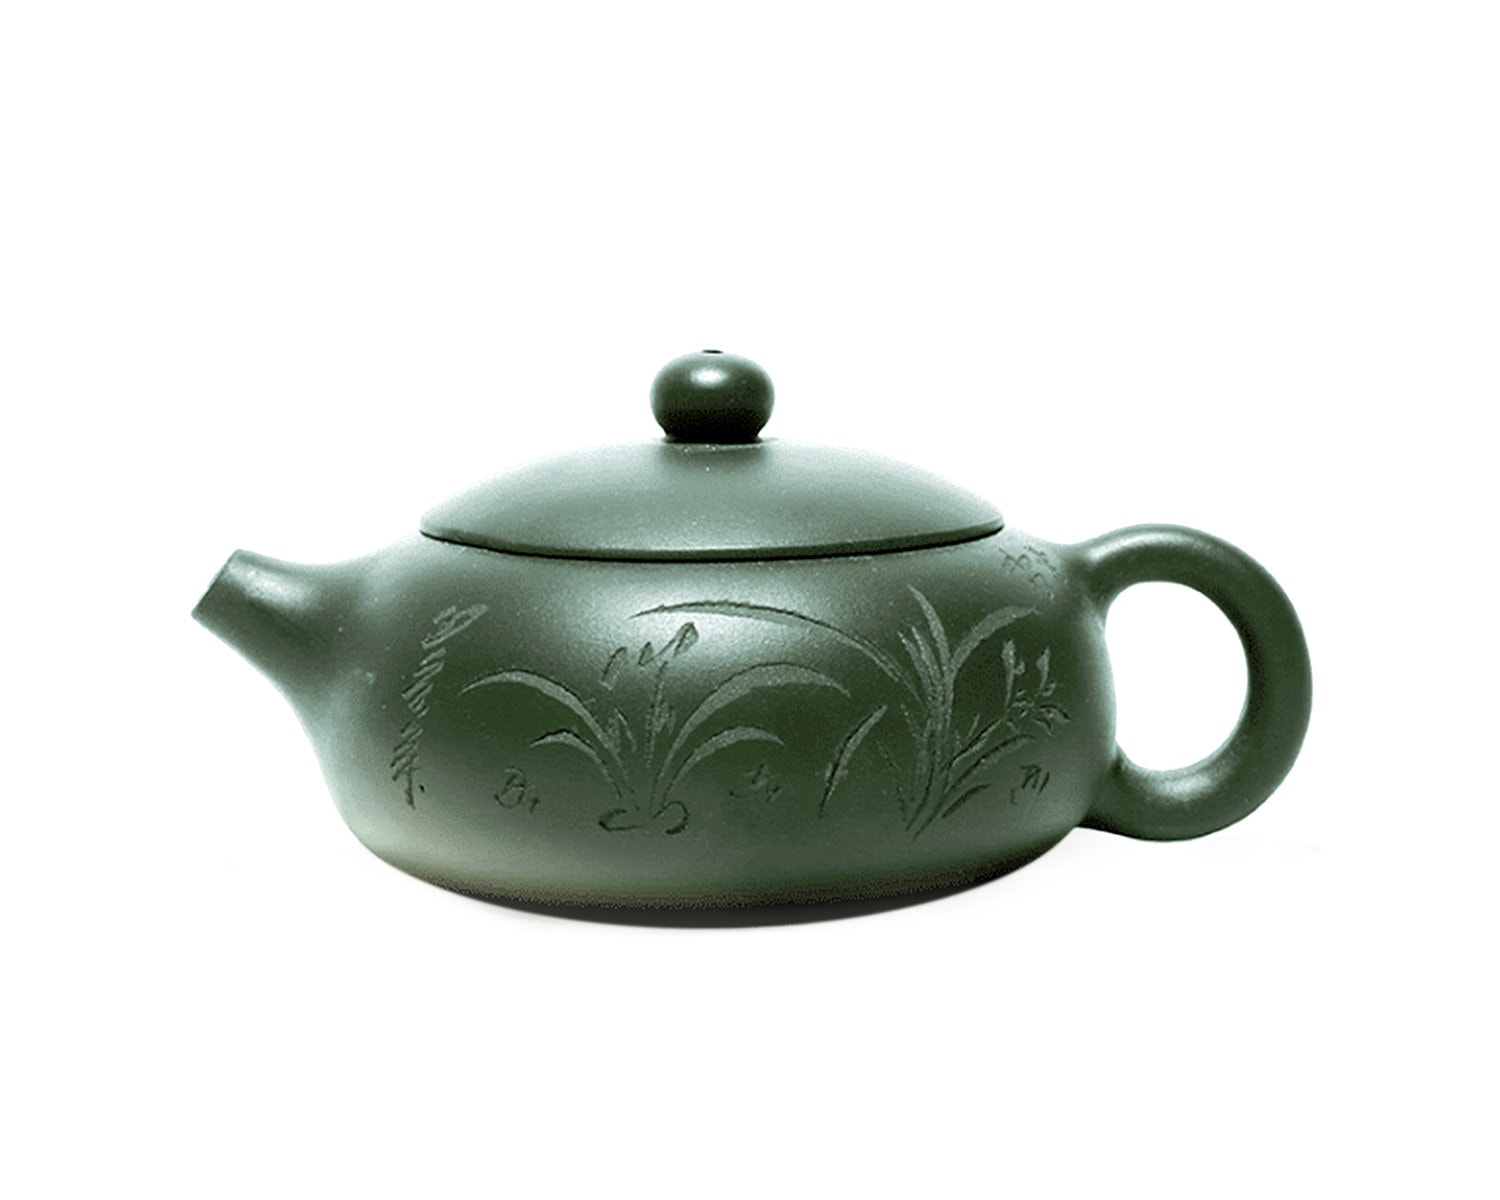 https://itea.co.il/wp-content/uploads/2020/11/products_Teaware_Teapot-190ml-Yixing-Clay-Teapot-Pond_01.jpg